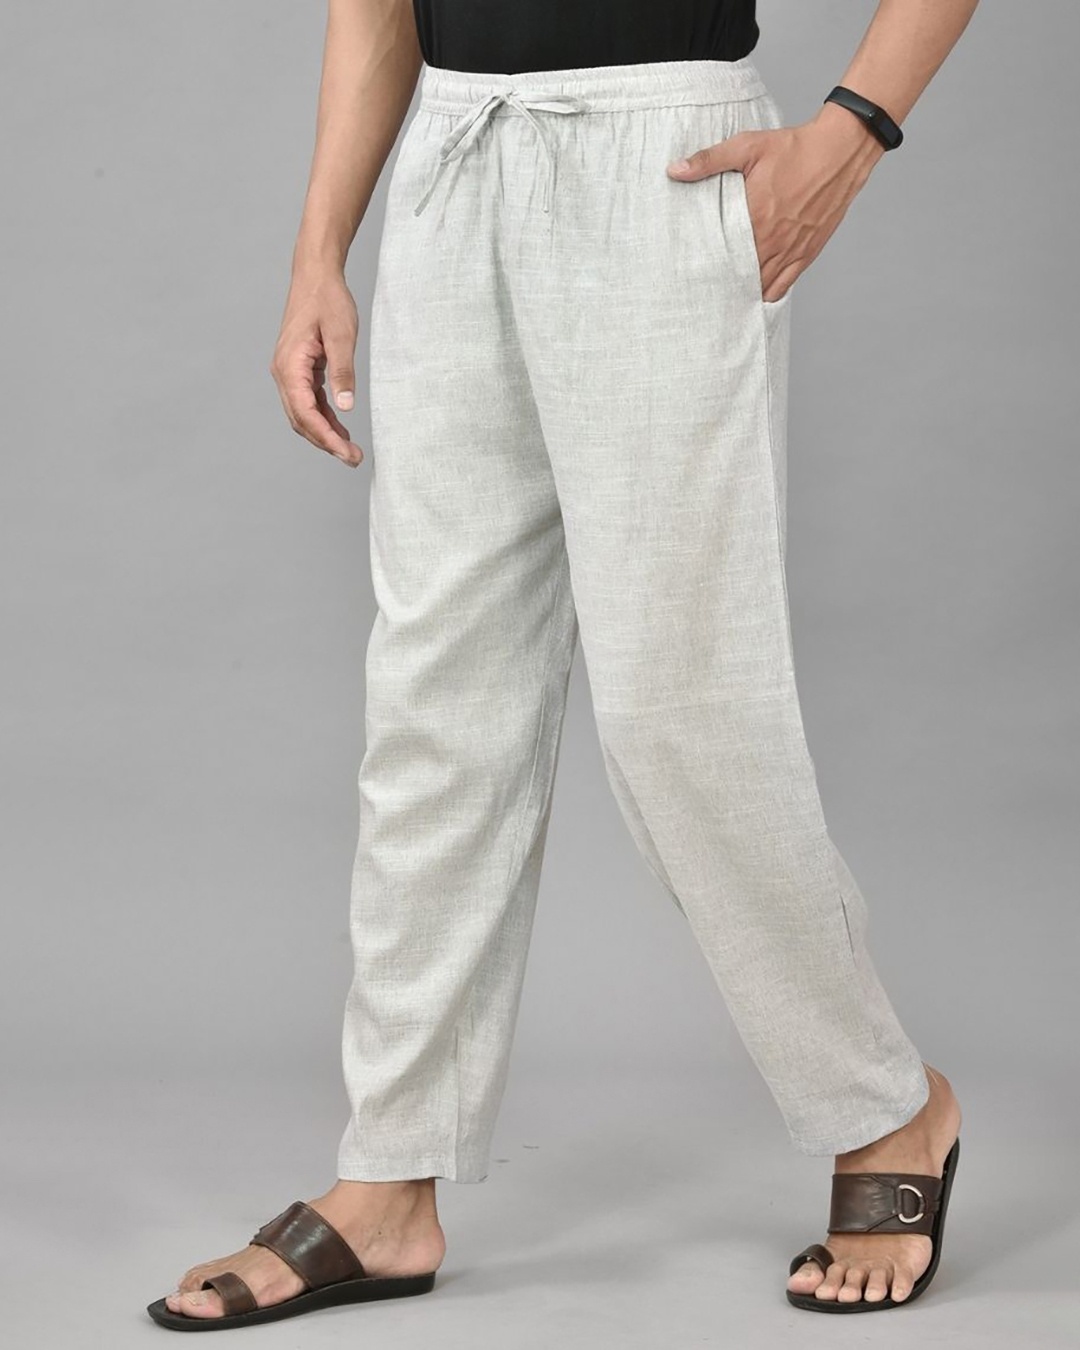 Second Order Cotton Linen Pleated Trousers White Men Informal Pants  Straight Fit | eBay